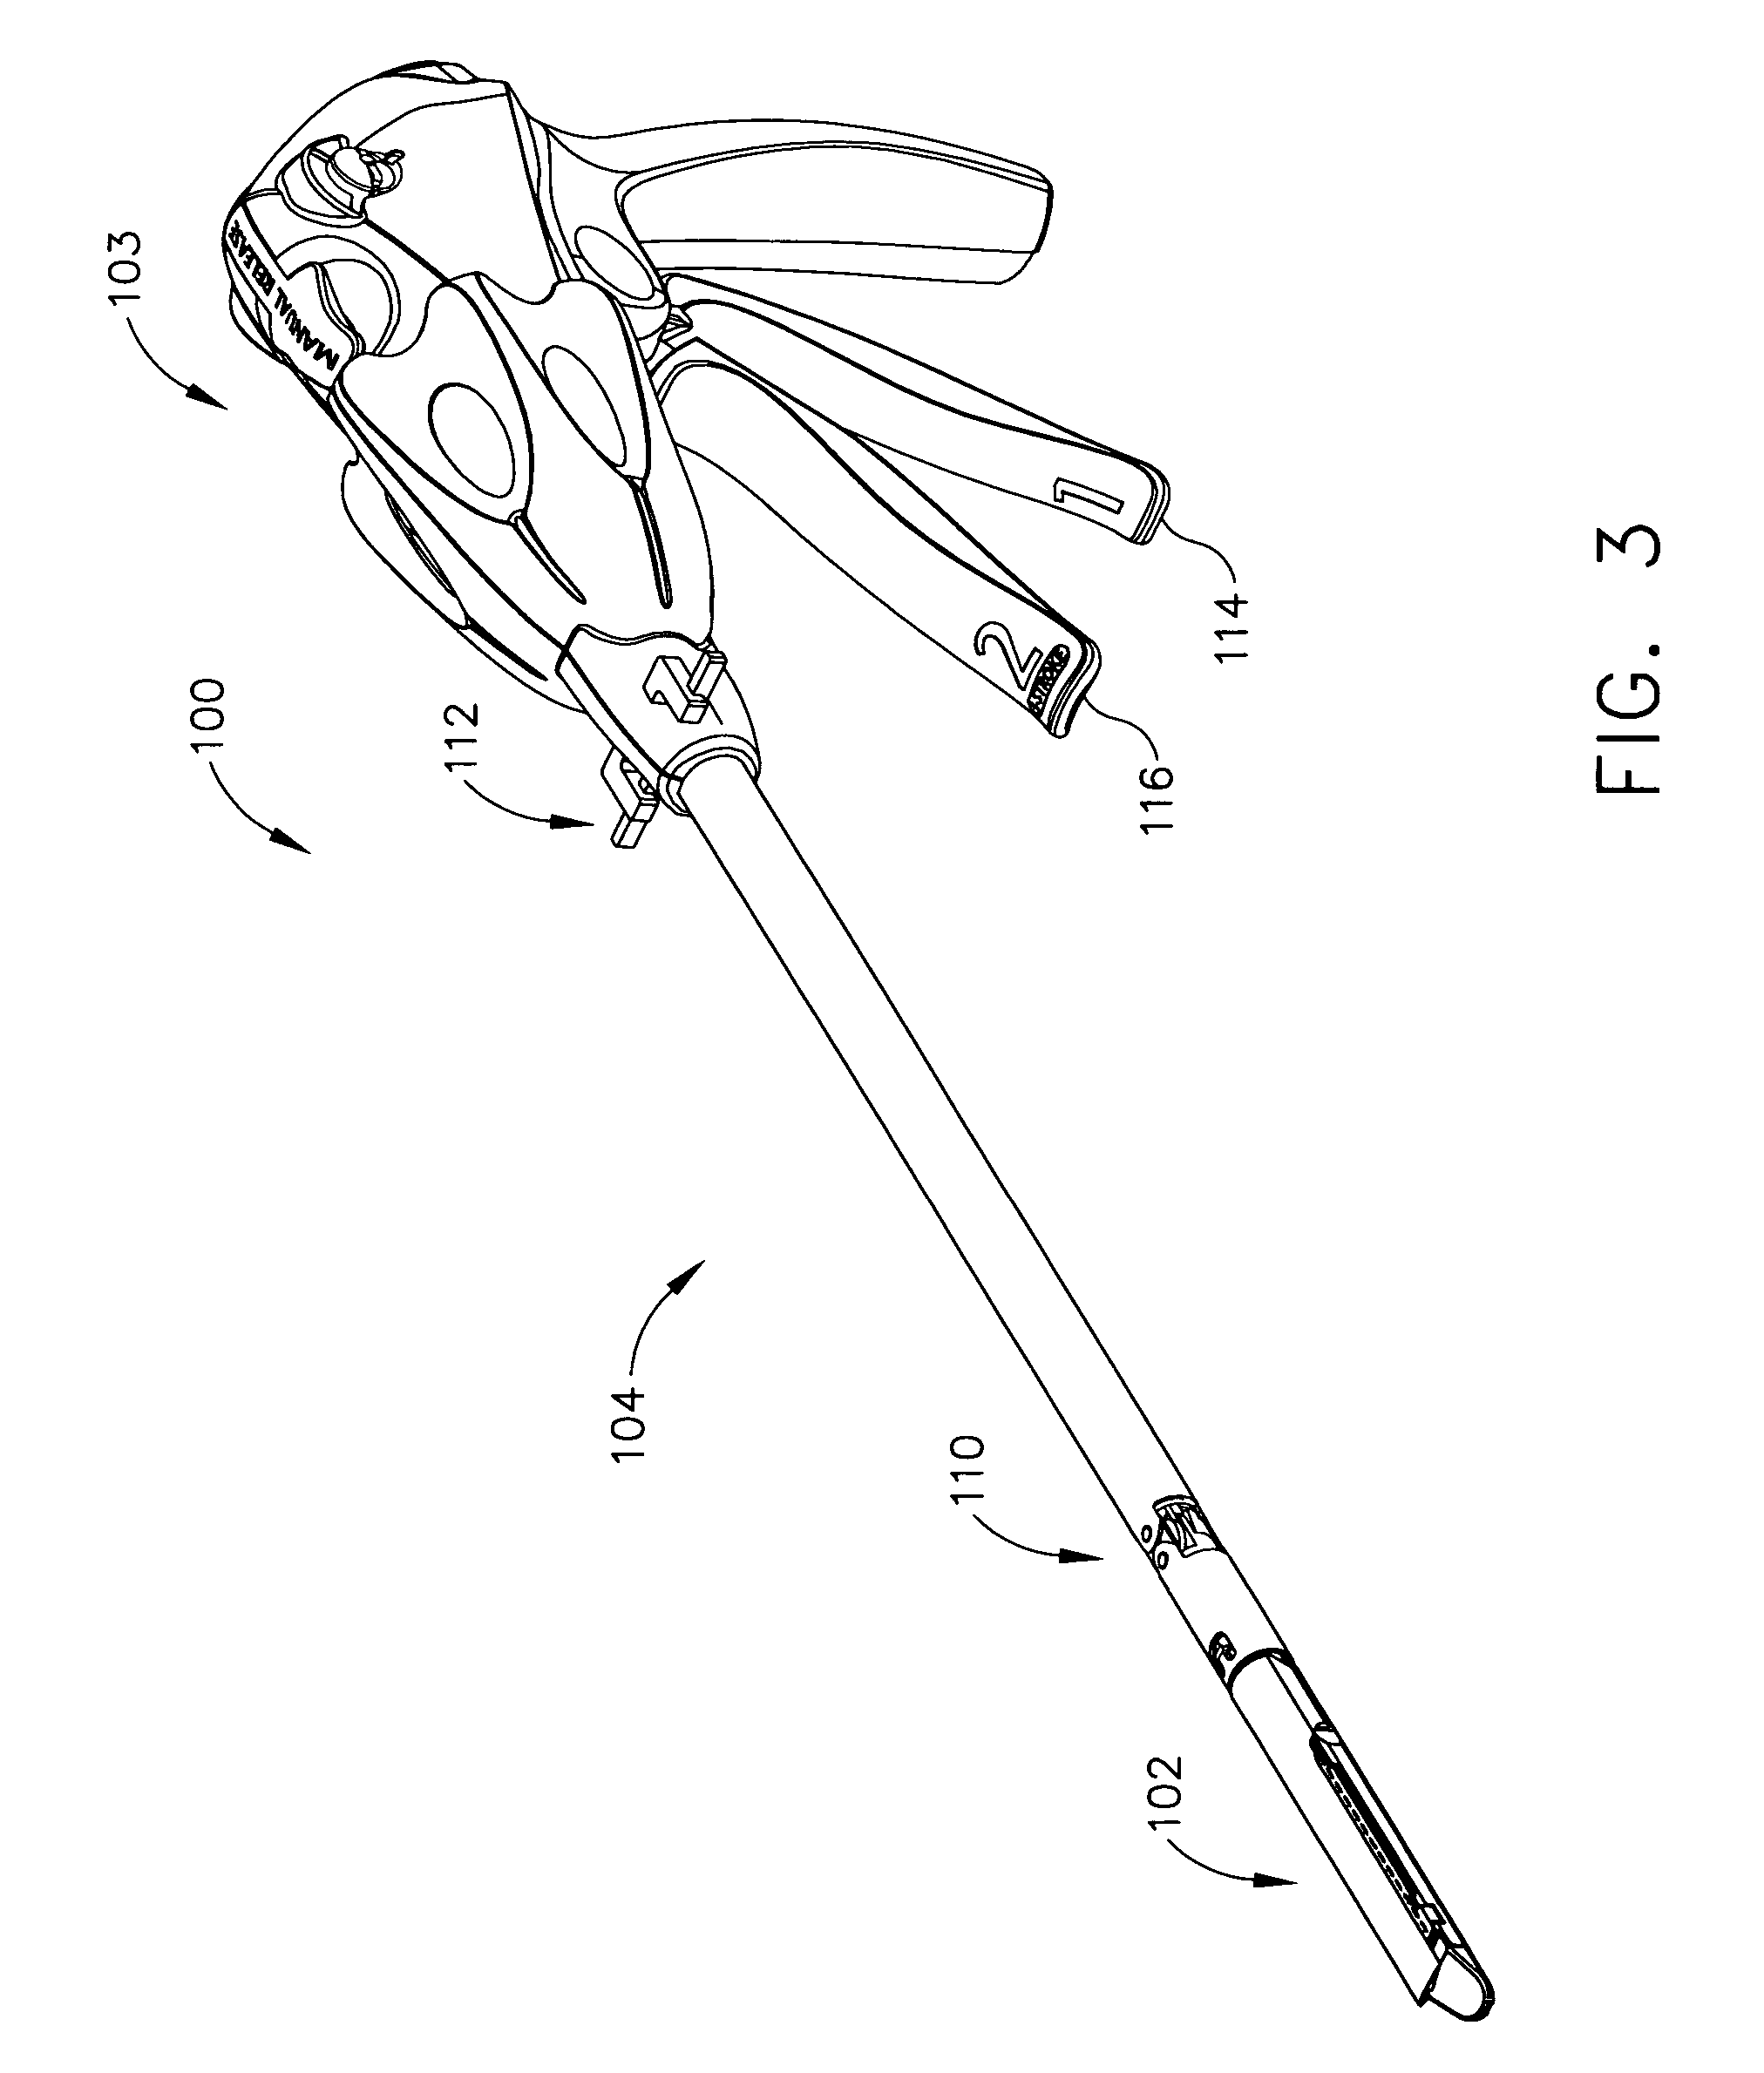 Surgical instrument having an articulating end effector